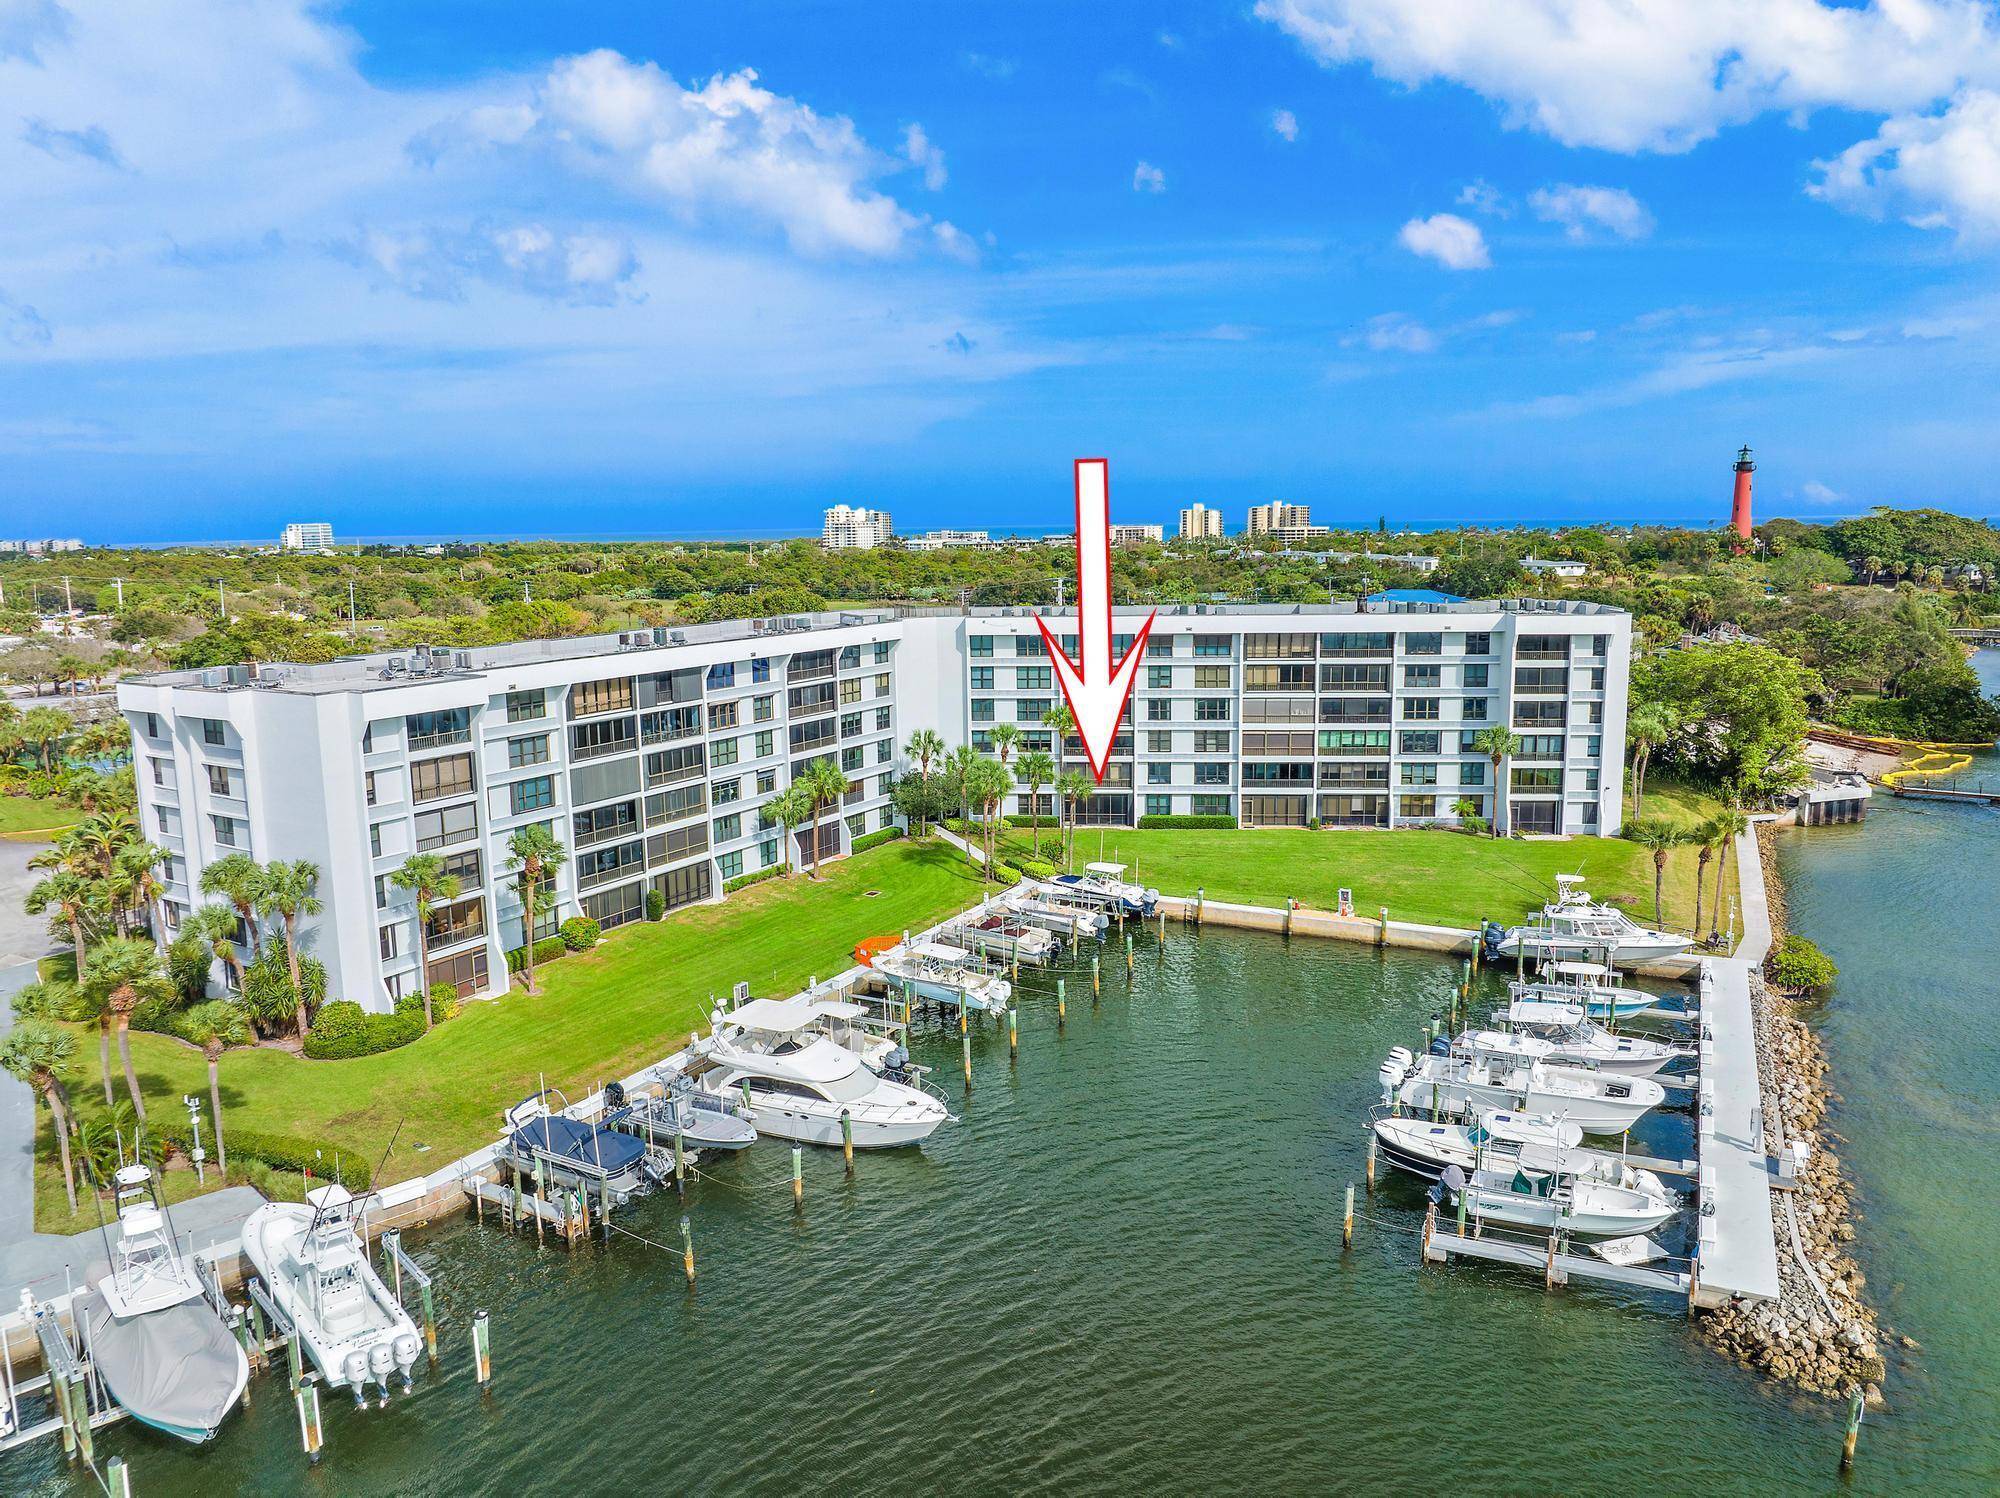 Enjoy amazing views of Jupiter Inlet and the Intracoastal from your new waterfront home in Jupiter Cove, where the Loxahatchee River, Jupiter Inlet and Intracoastal all converge offering easy access ...